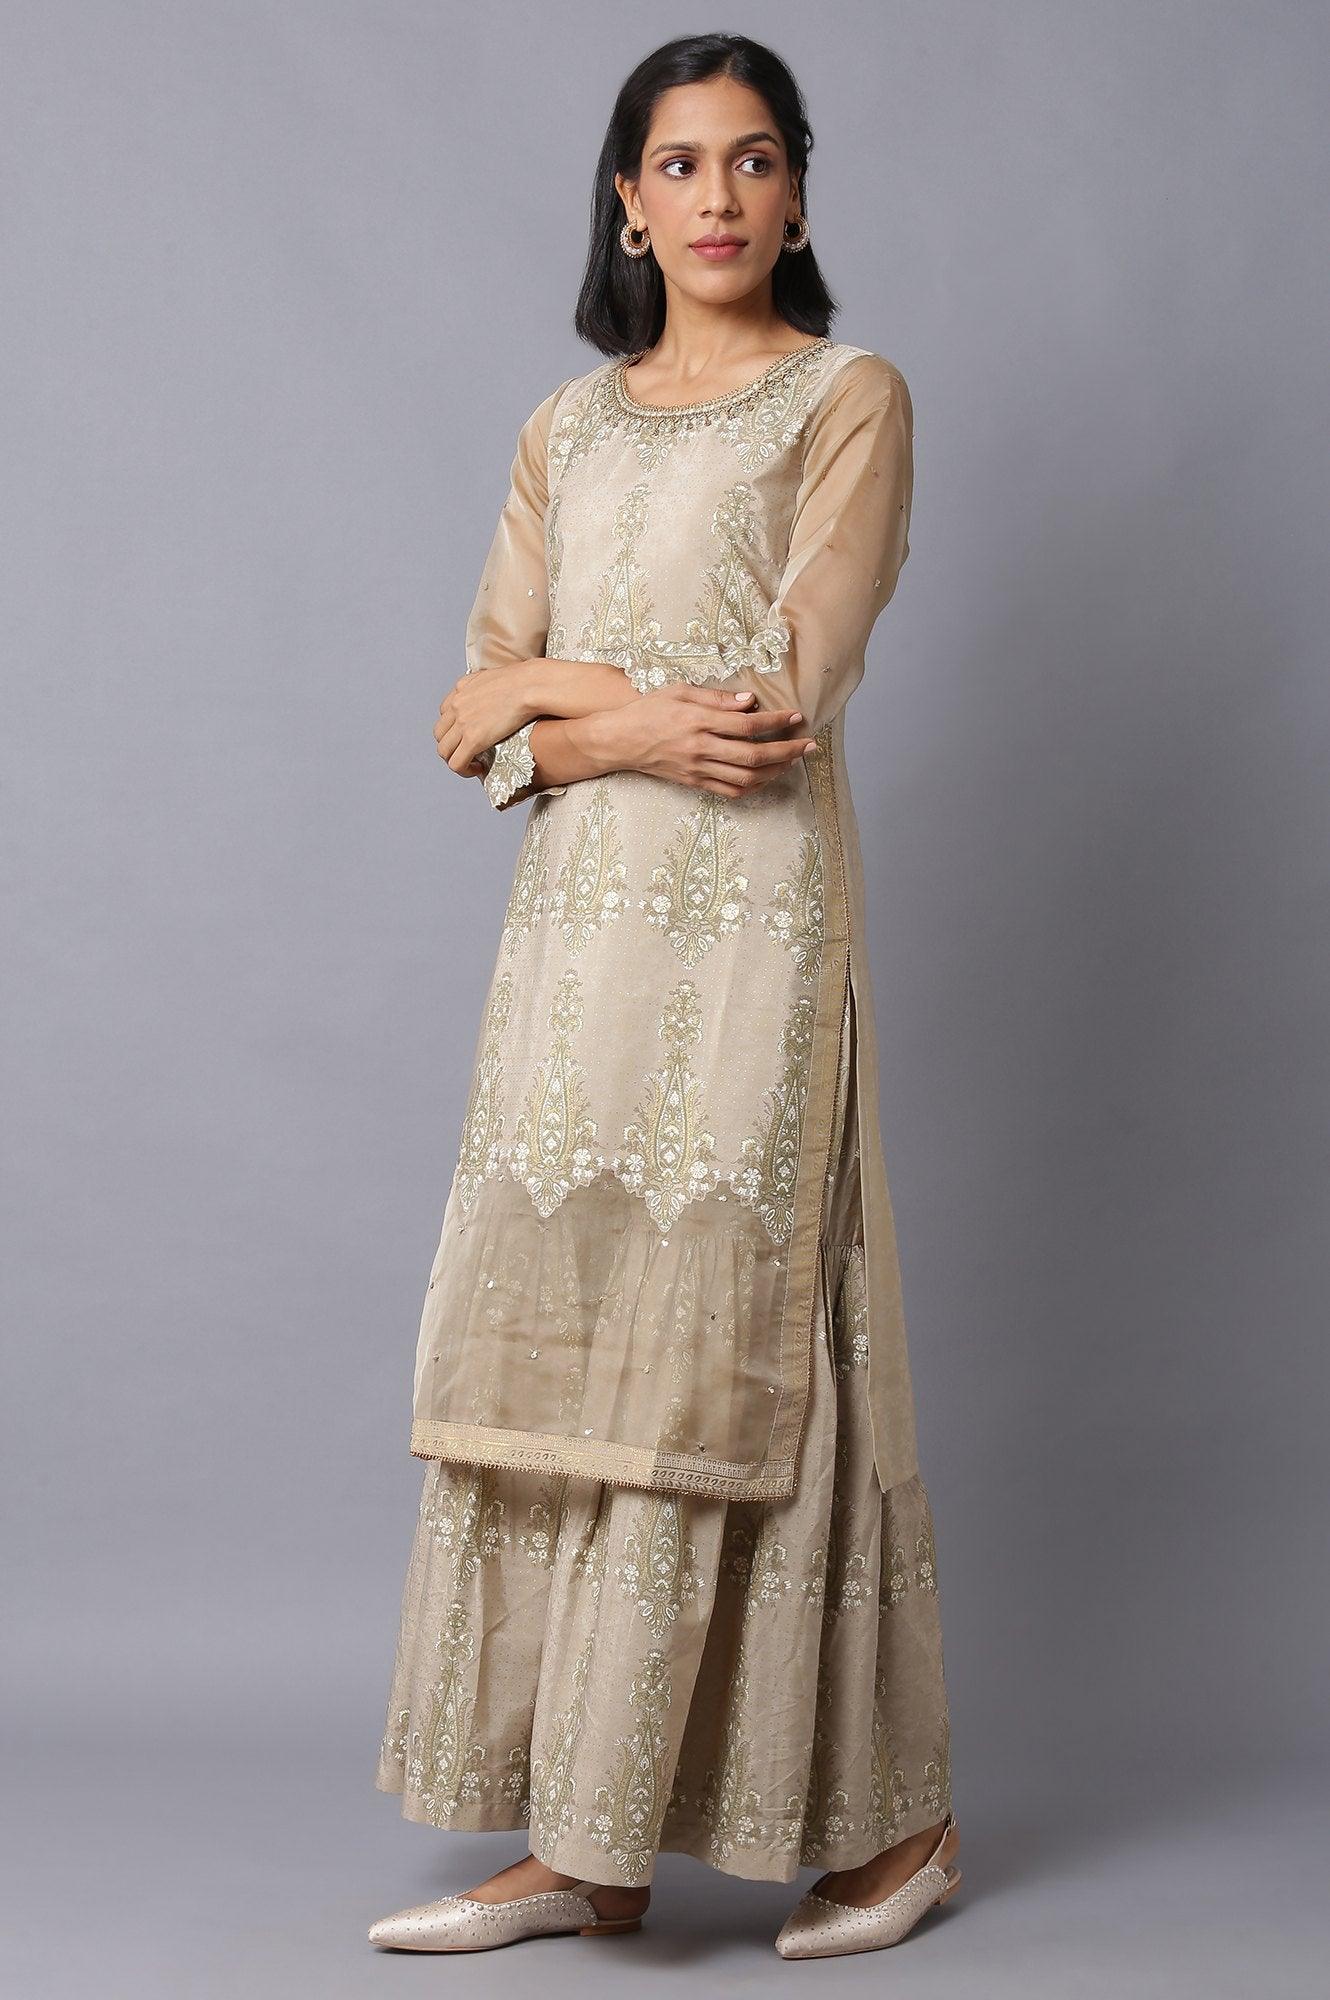 Gold Beige Floral Printed kurta With Embroidery - wforwoman